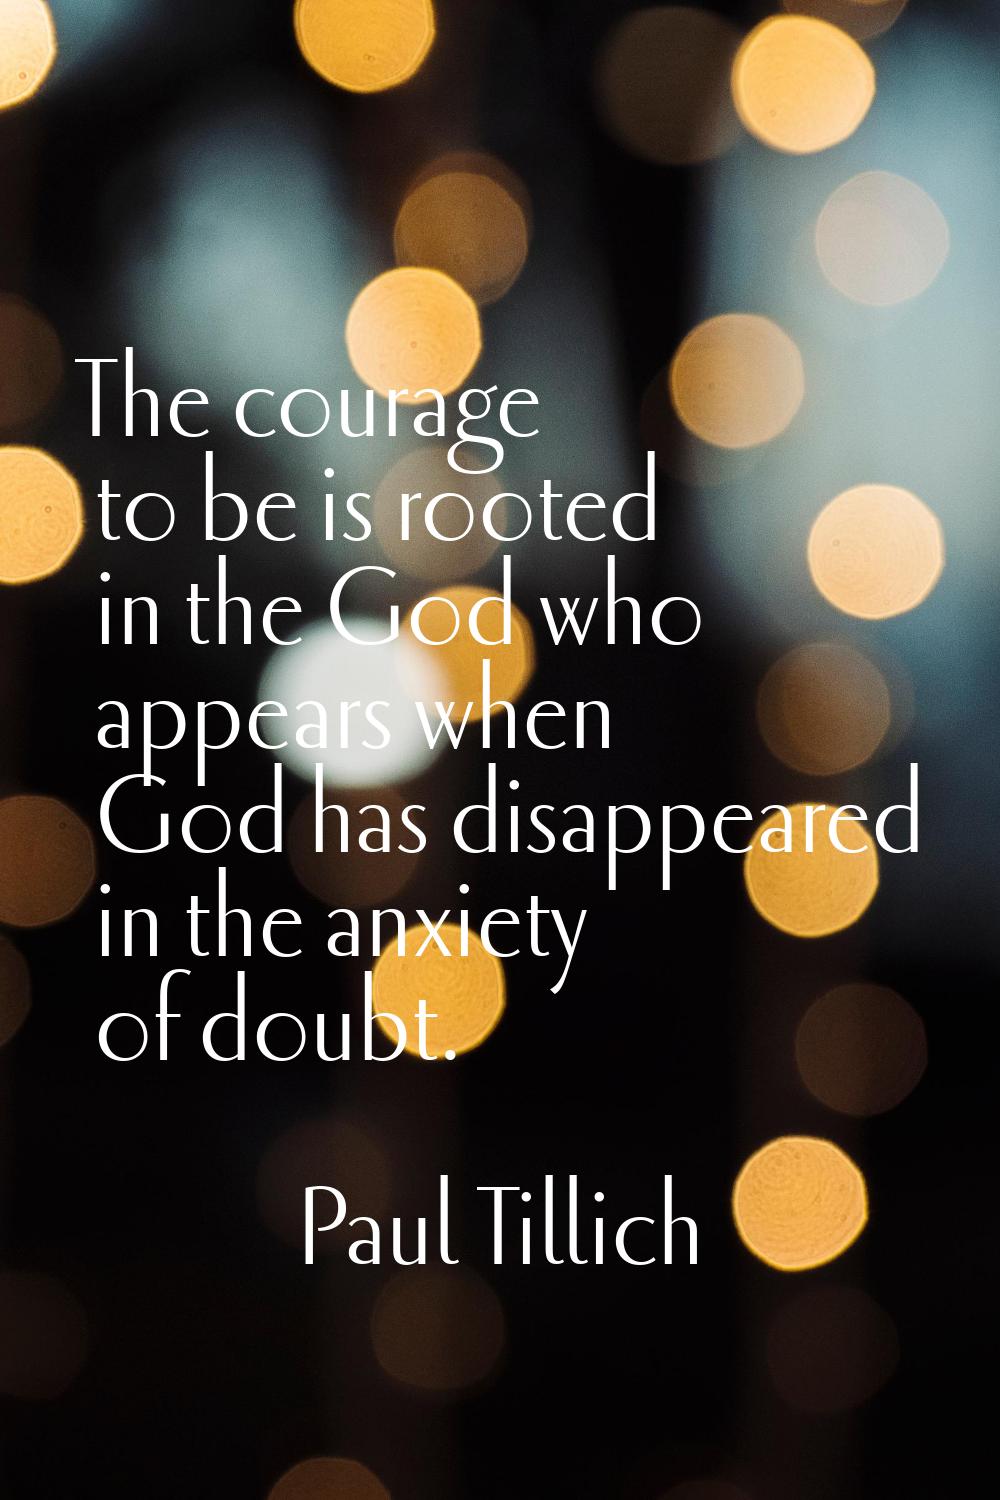 The courage to be is rooted in the God who appears when God has disappeared in the anxiety of doubt